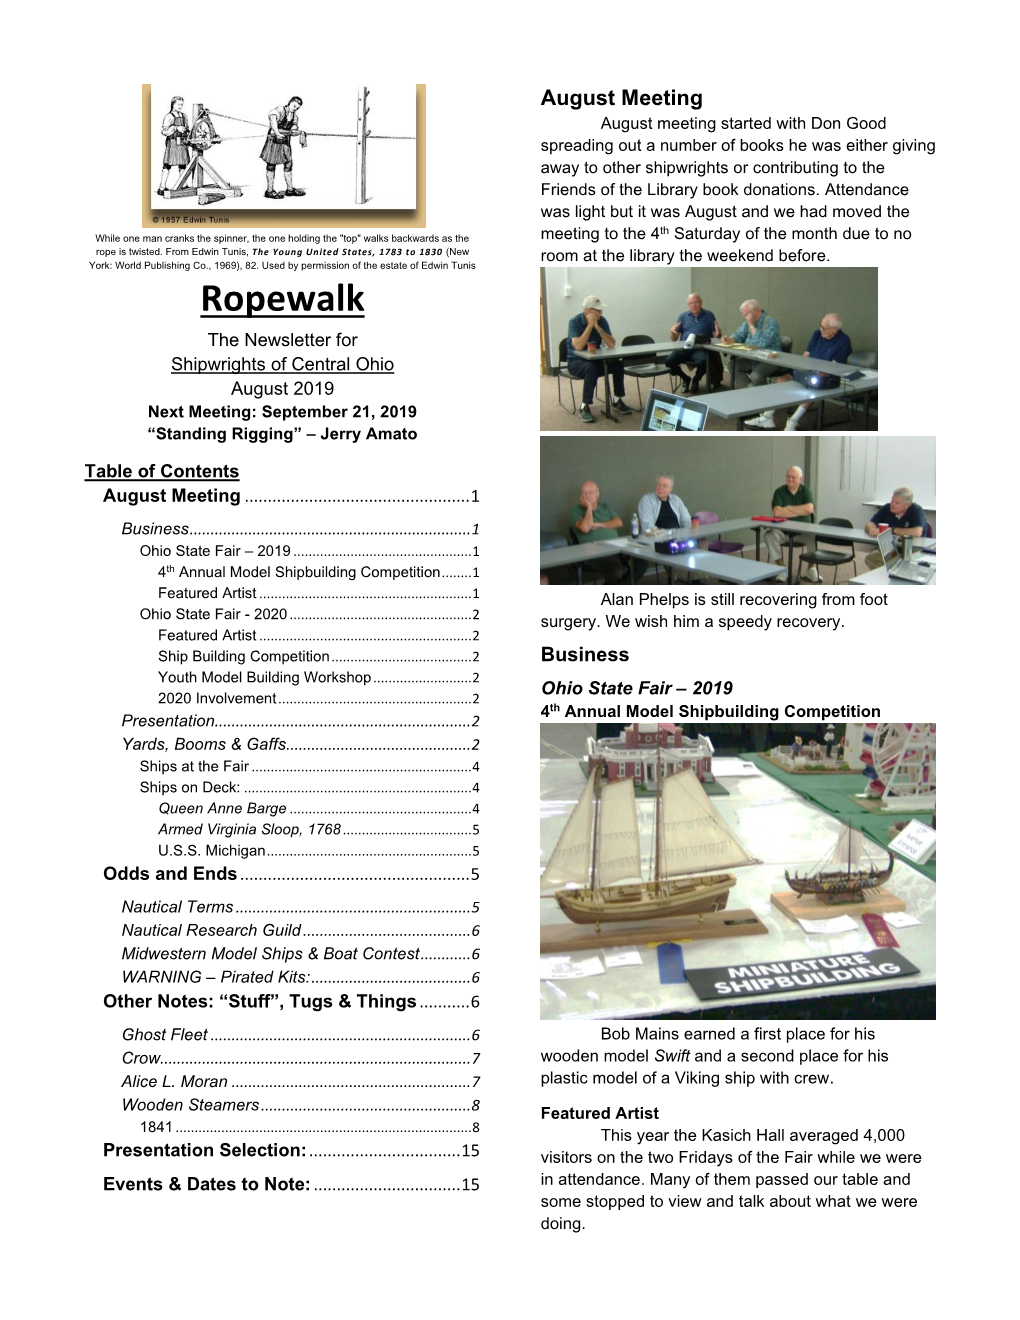 Ropewalk the Newsletter for Shipwrights of Central Ohio August 2019 Next Meeting: September 21, 2019 “Standing Rigging” – Jerry Amato